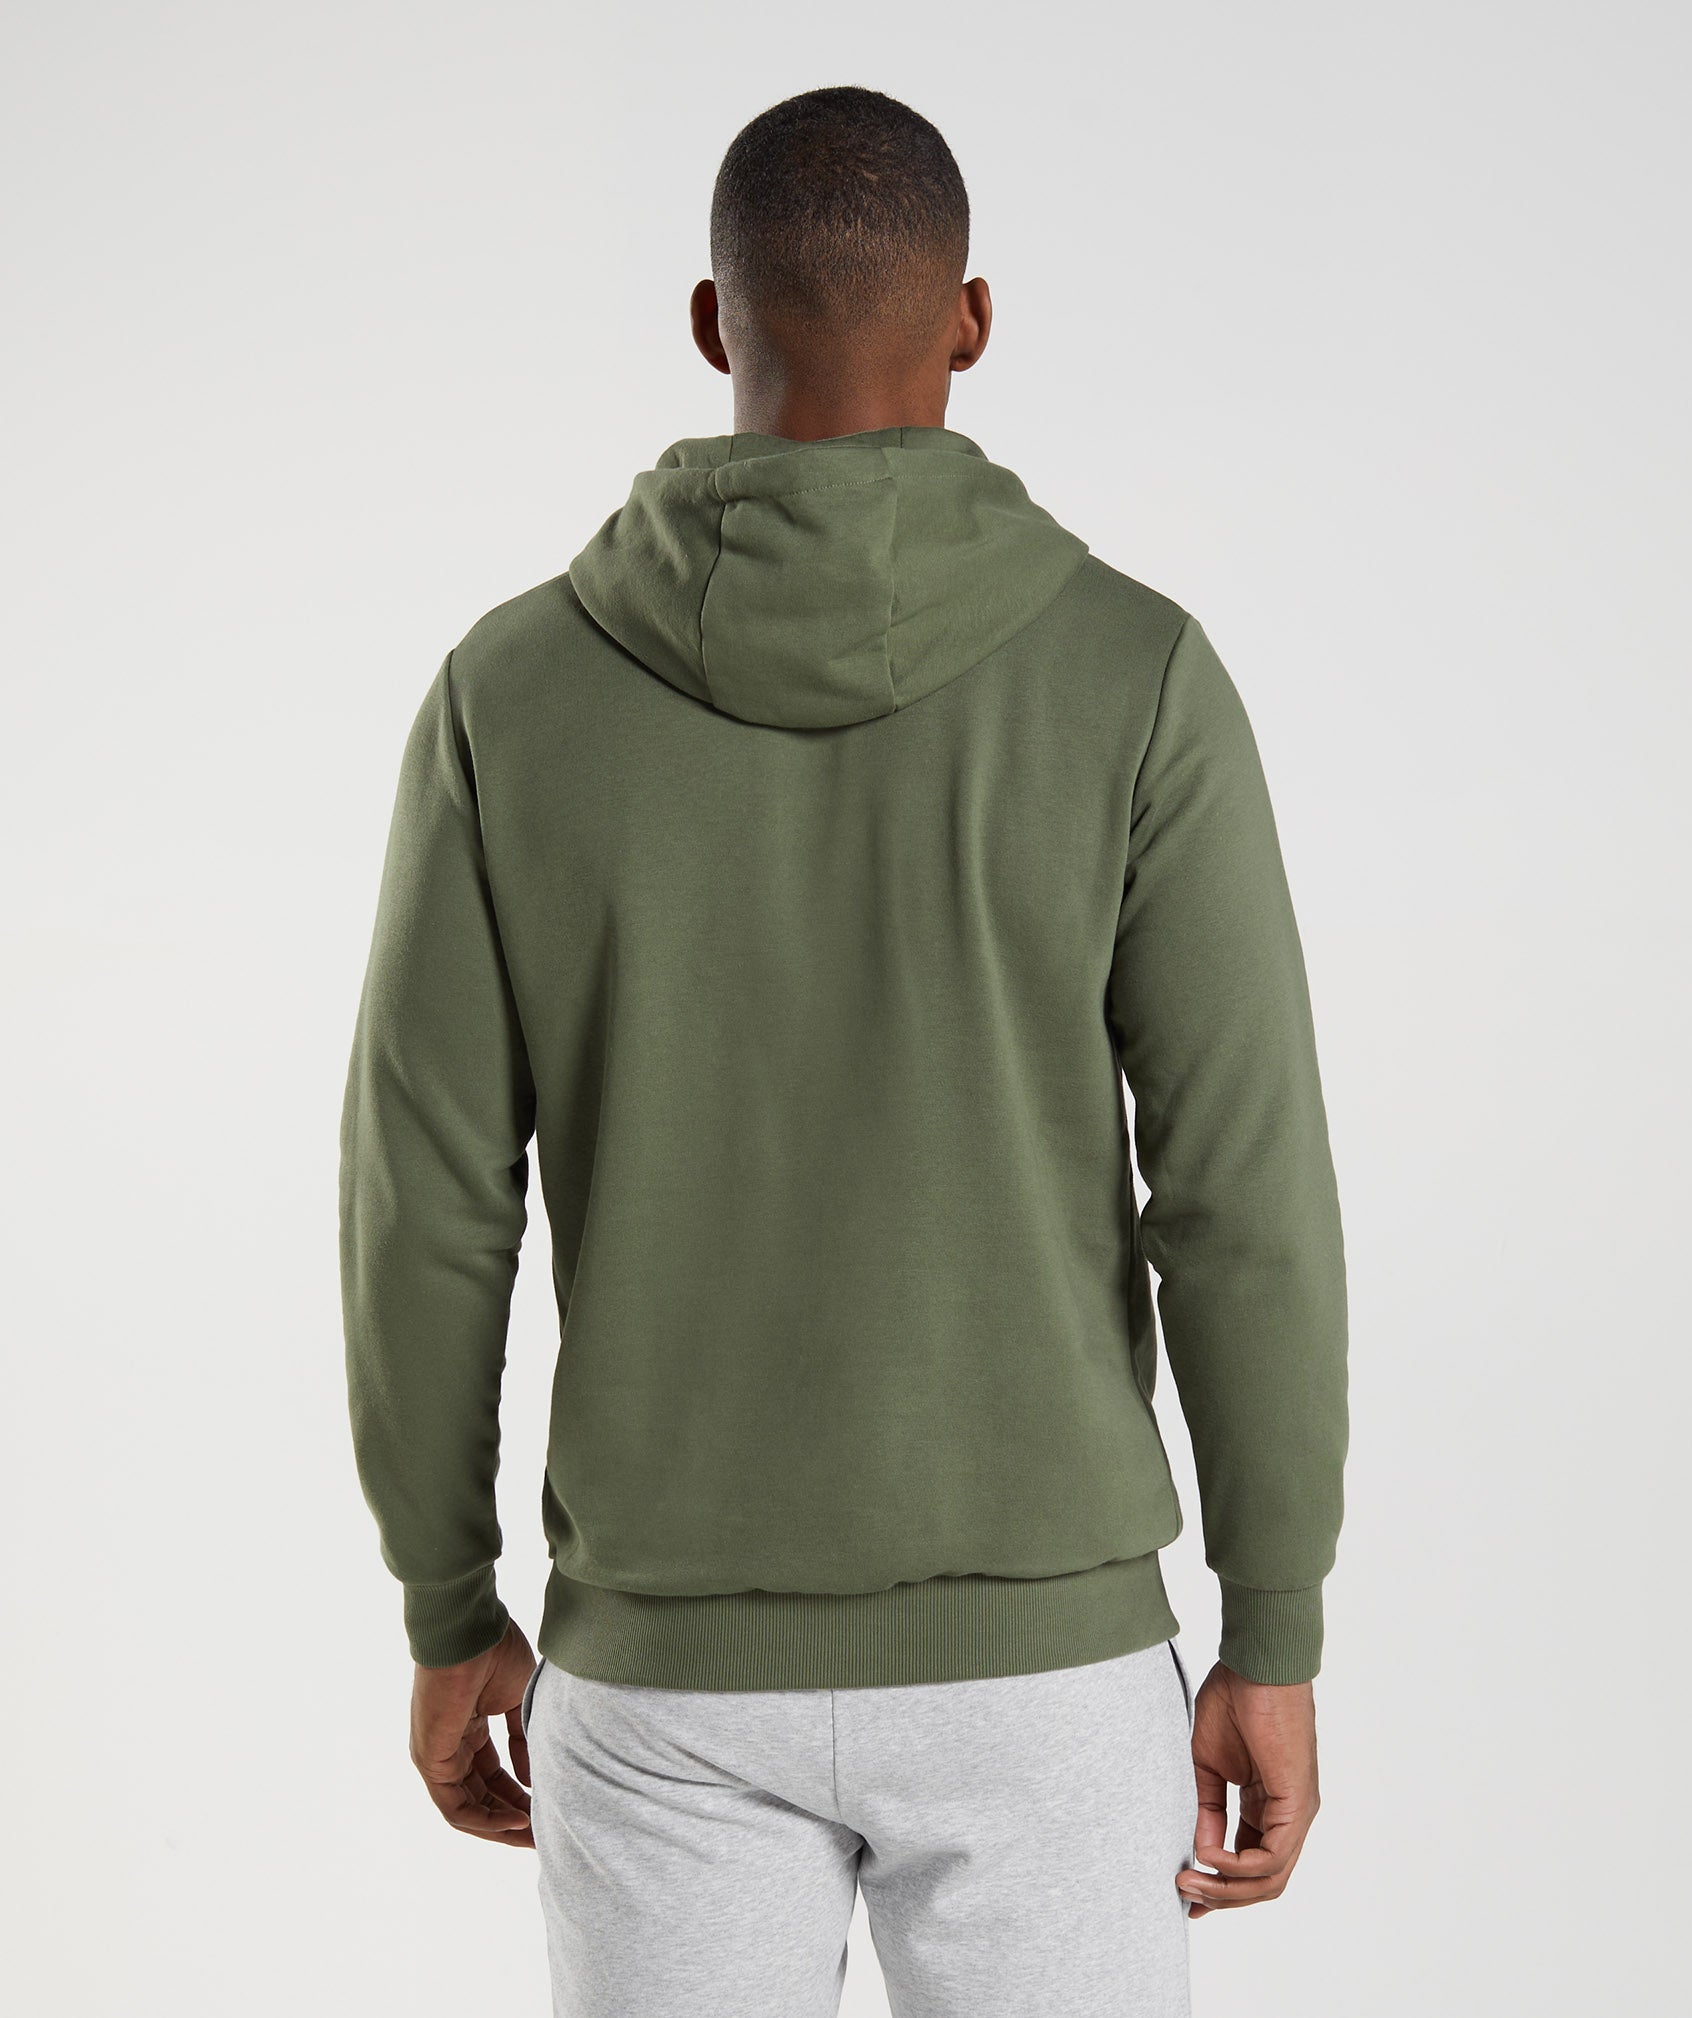 Sharkhead Infill Hoodie in Core Olive - view 2